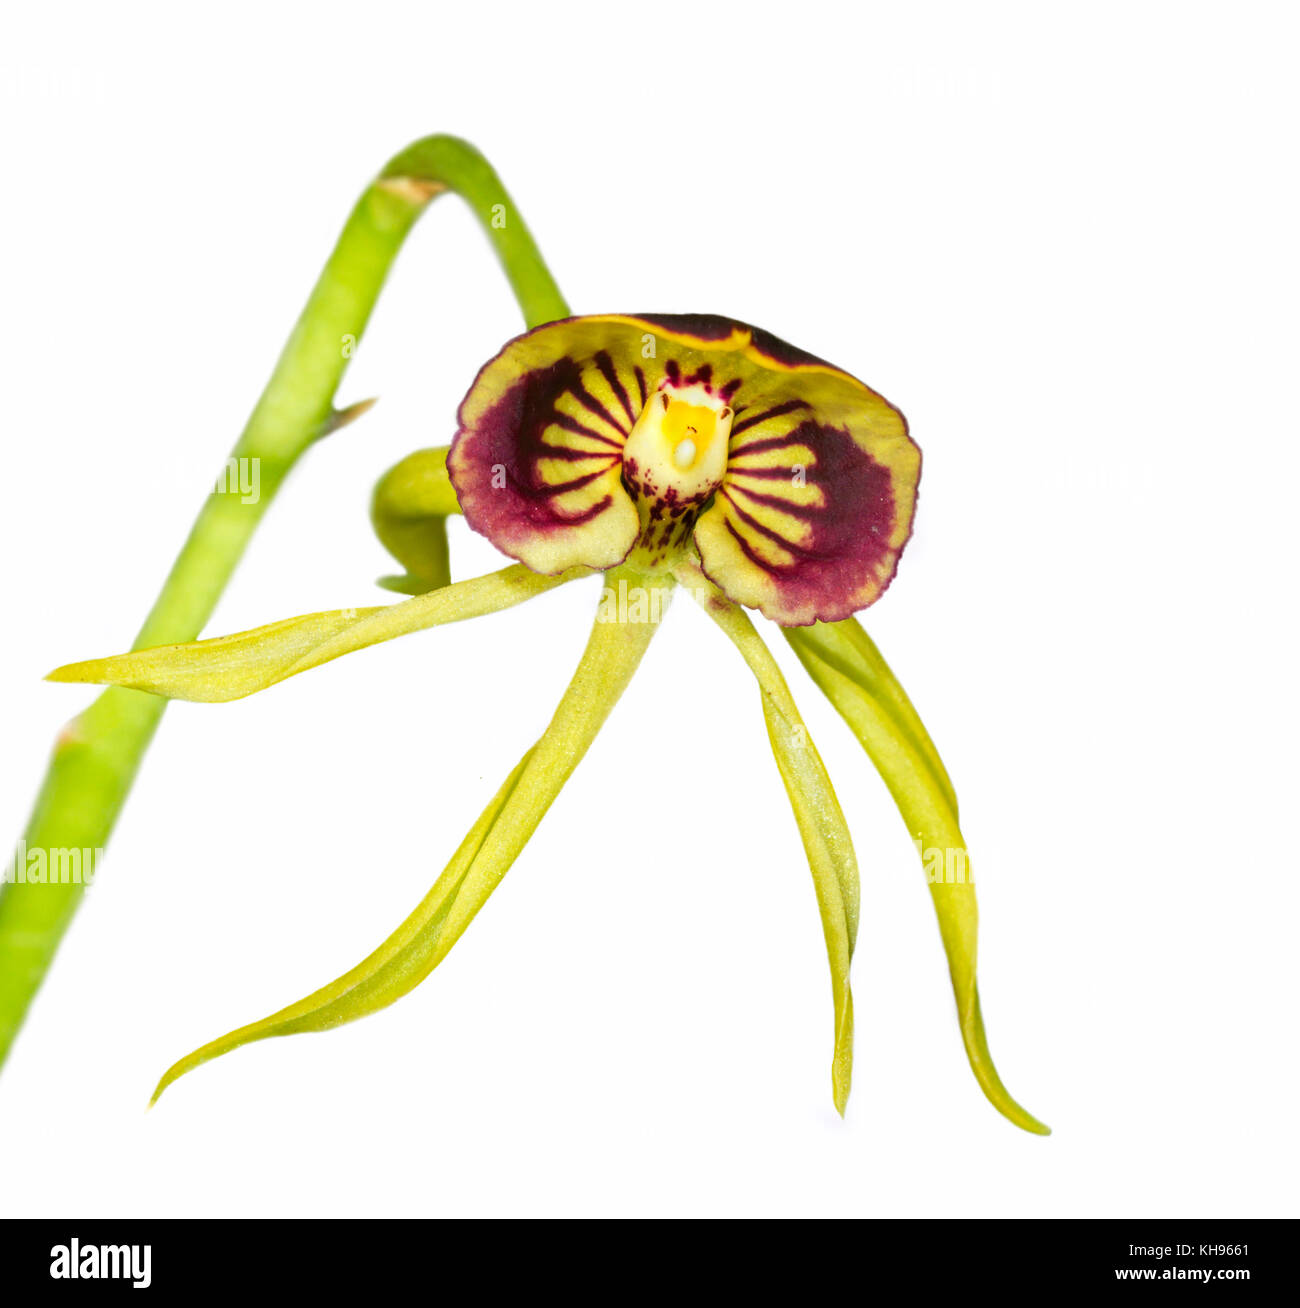 Prosthechea cochleata or clamshell orchid Stock Photo